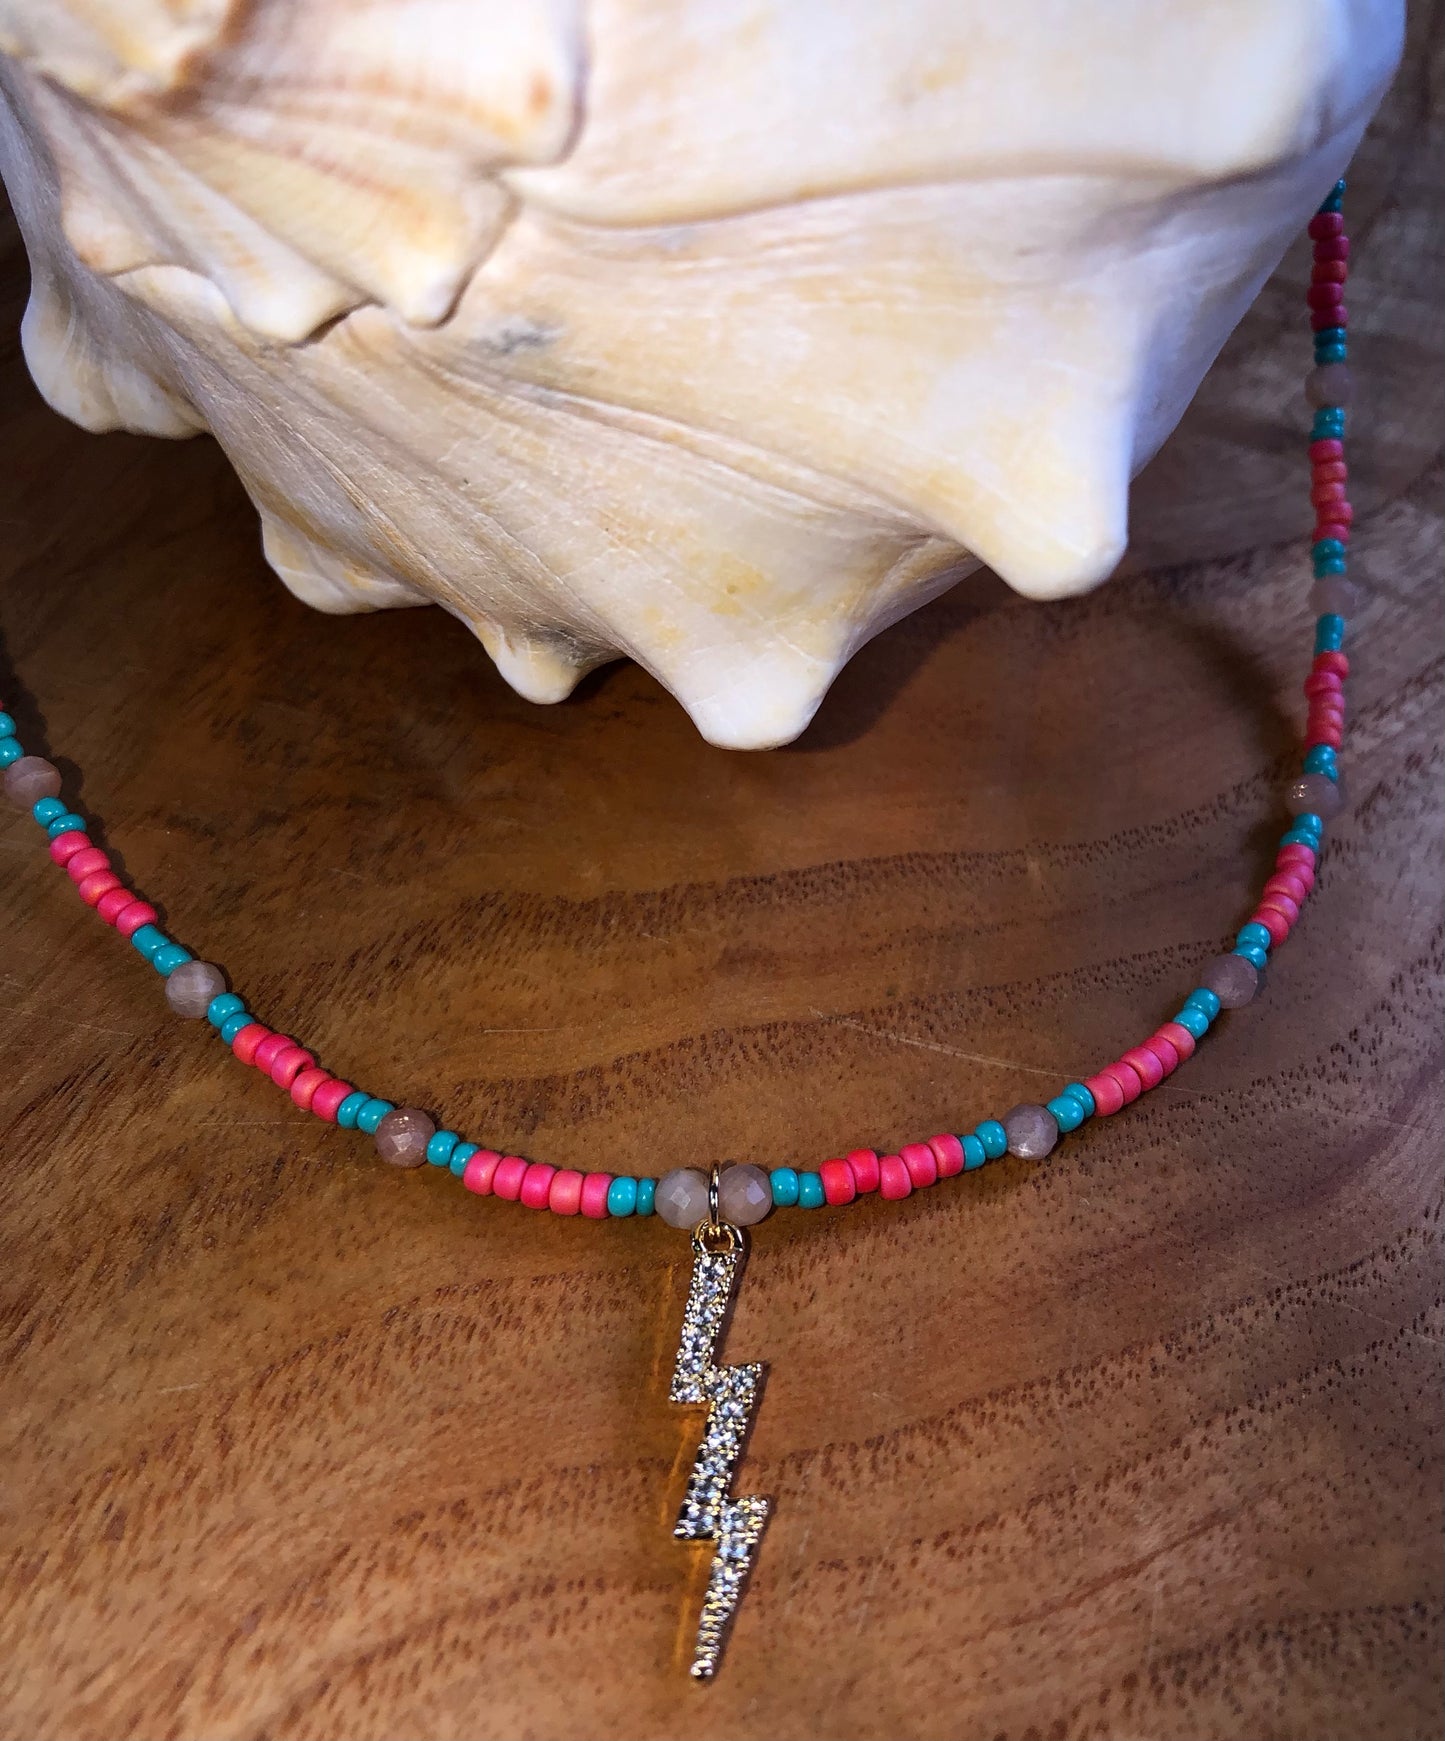 Necklace with a 29mm gold plated clear crystal lightning bolt charm, hot pink & turquoise glass seed beads, and peach sunstones.